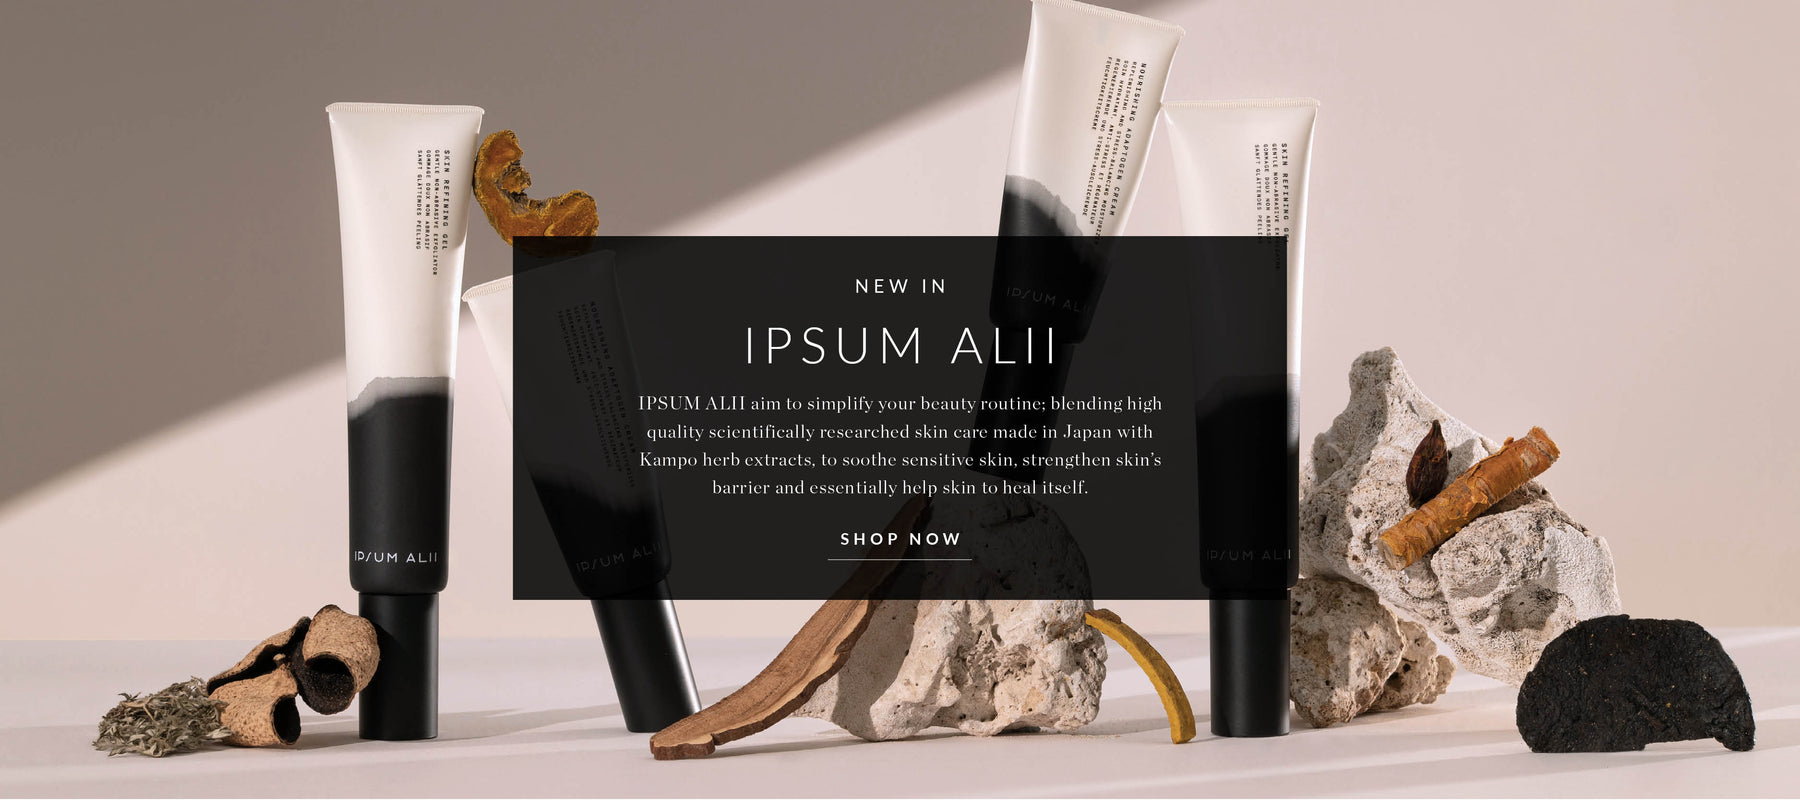 Shop the IPSUM ALII skincare collection made in Japan - a description of ingredients and brand philosophy